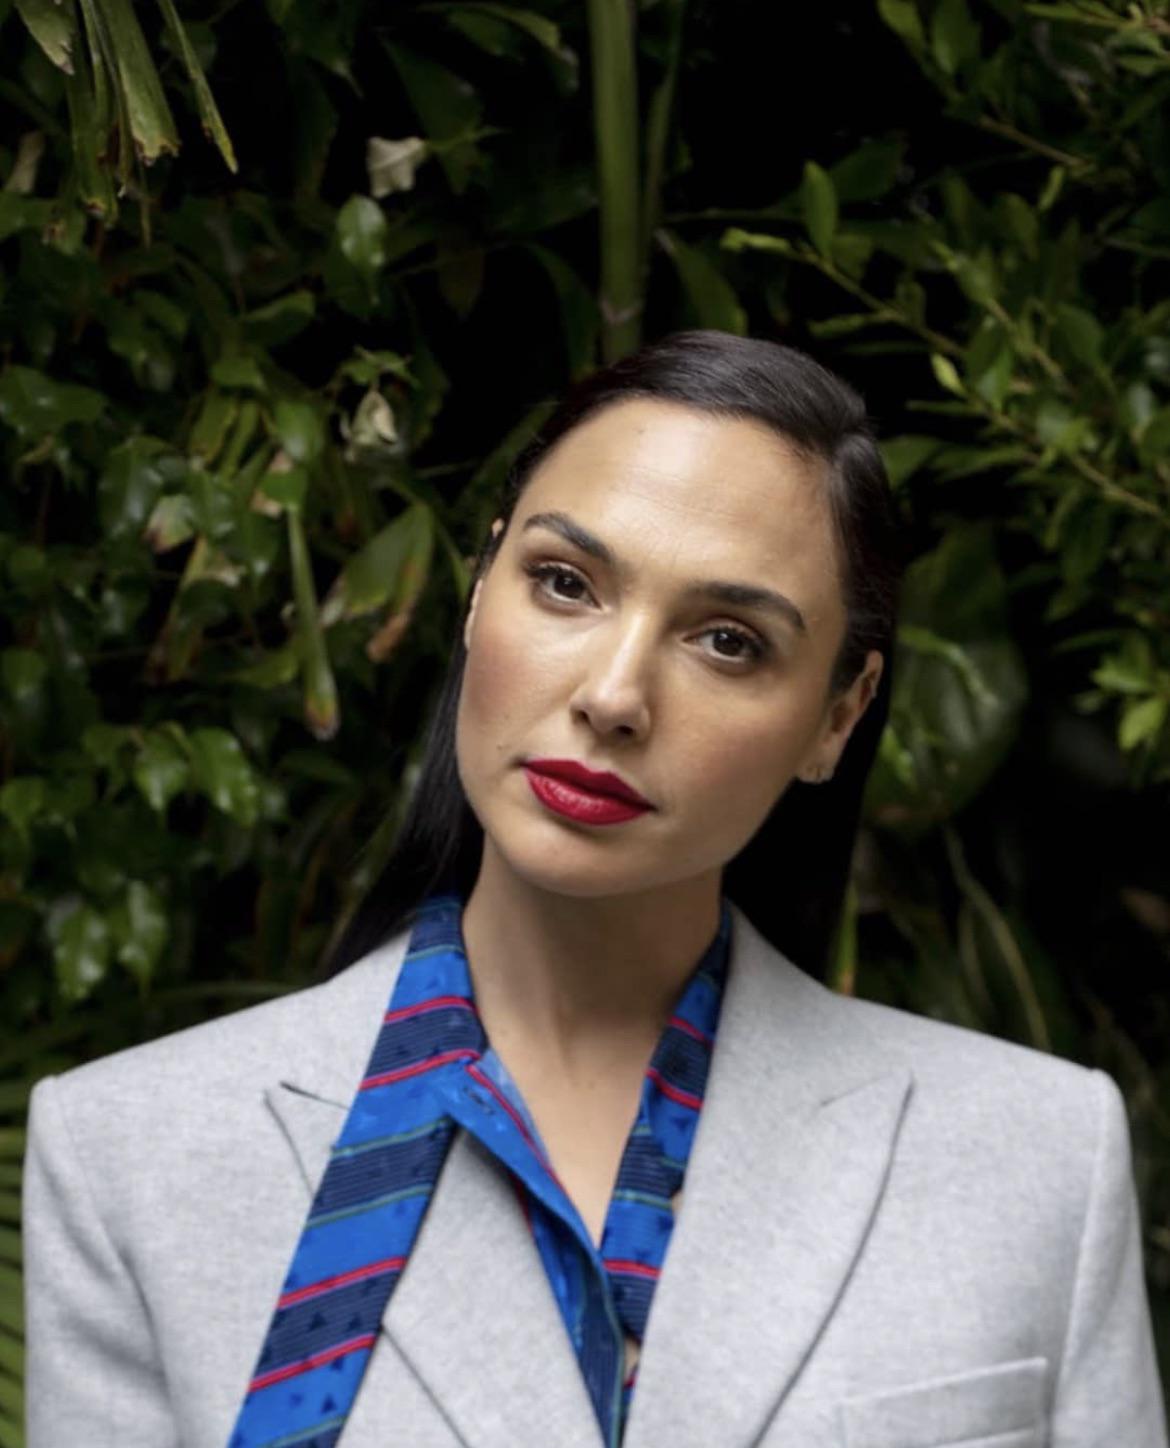 Gal Gadot Has One Of The Most Fuckable Faces I Would Love To Make A